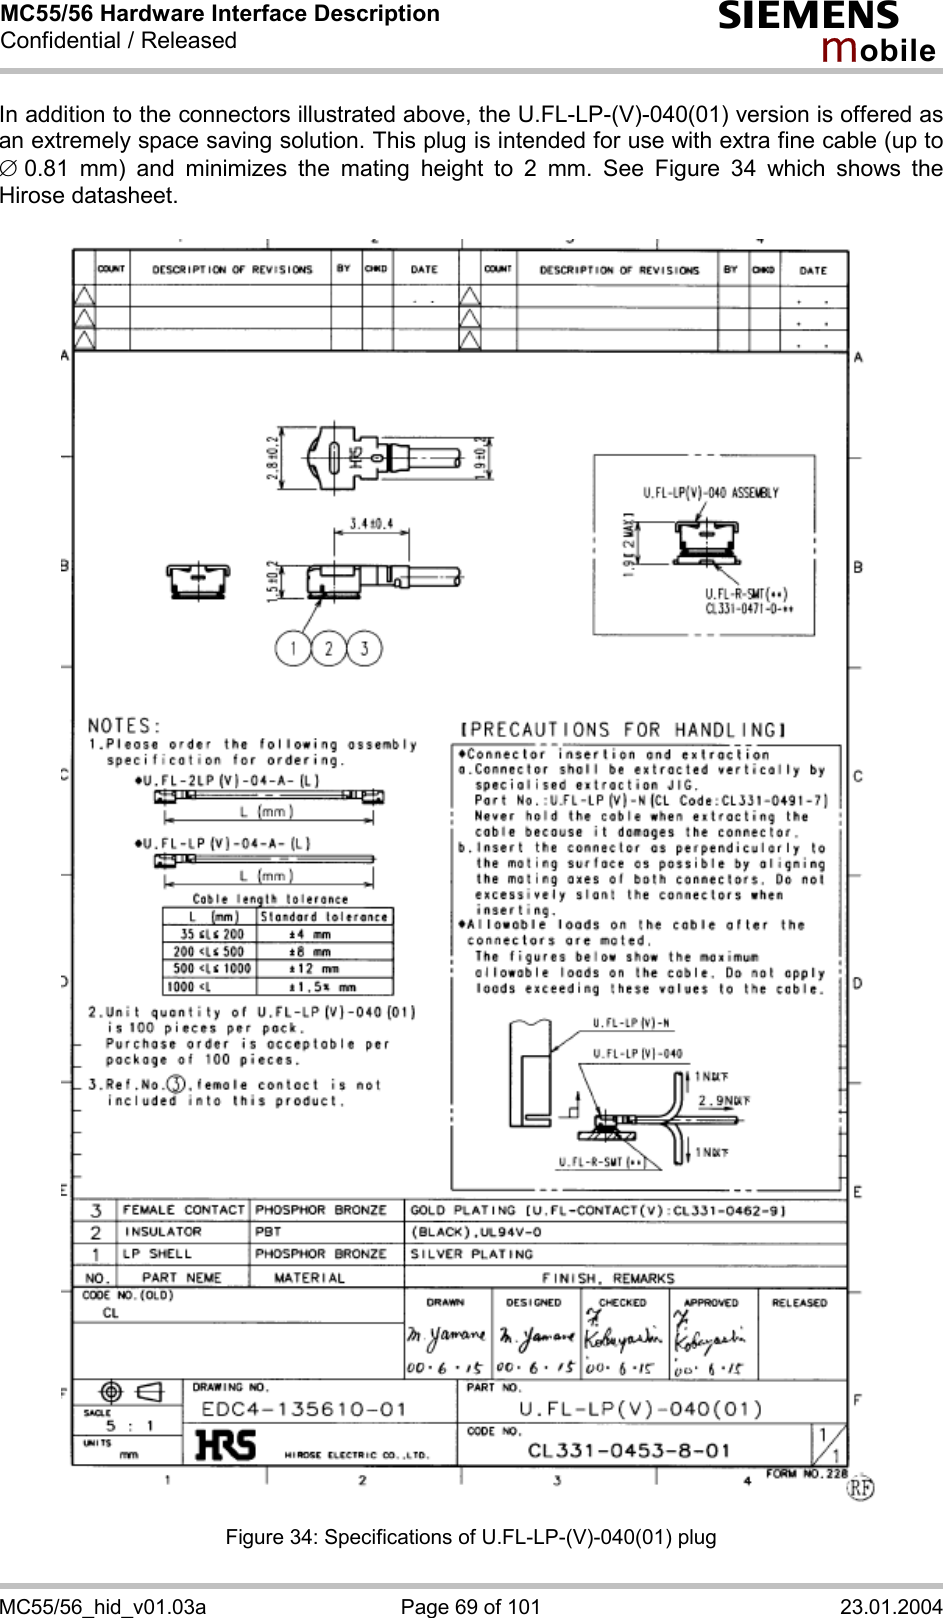 MC55/56 Hardware Interface Description Confidential / Released s mo b i l e MC55/56_hid_v01.03a  Page 69 of 101  23.01.2004 In addition to the connectors illustrated above, the U.FL-LP-(V)-040(01) version is offered as an extremely space saving solution. This plug is intended for use with extra fine cable (up to Æ 0.81 mm) and minimizes the mating height to 2 mm. See Figure 34 which shows the Hirose datasheet.    Figure 34: Specifications of U.FL-LP-(V)-040(01) plug 